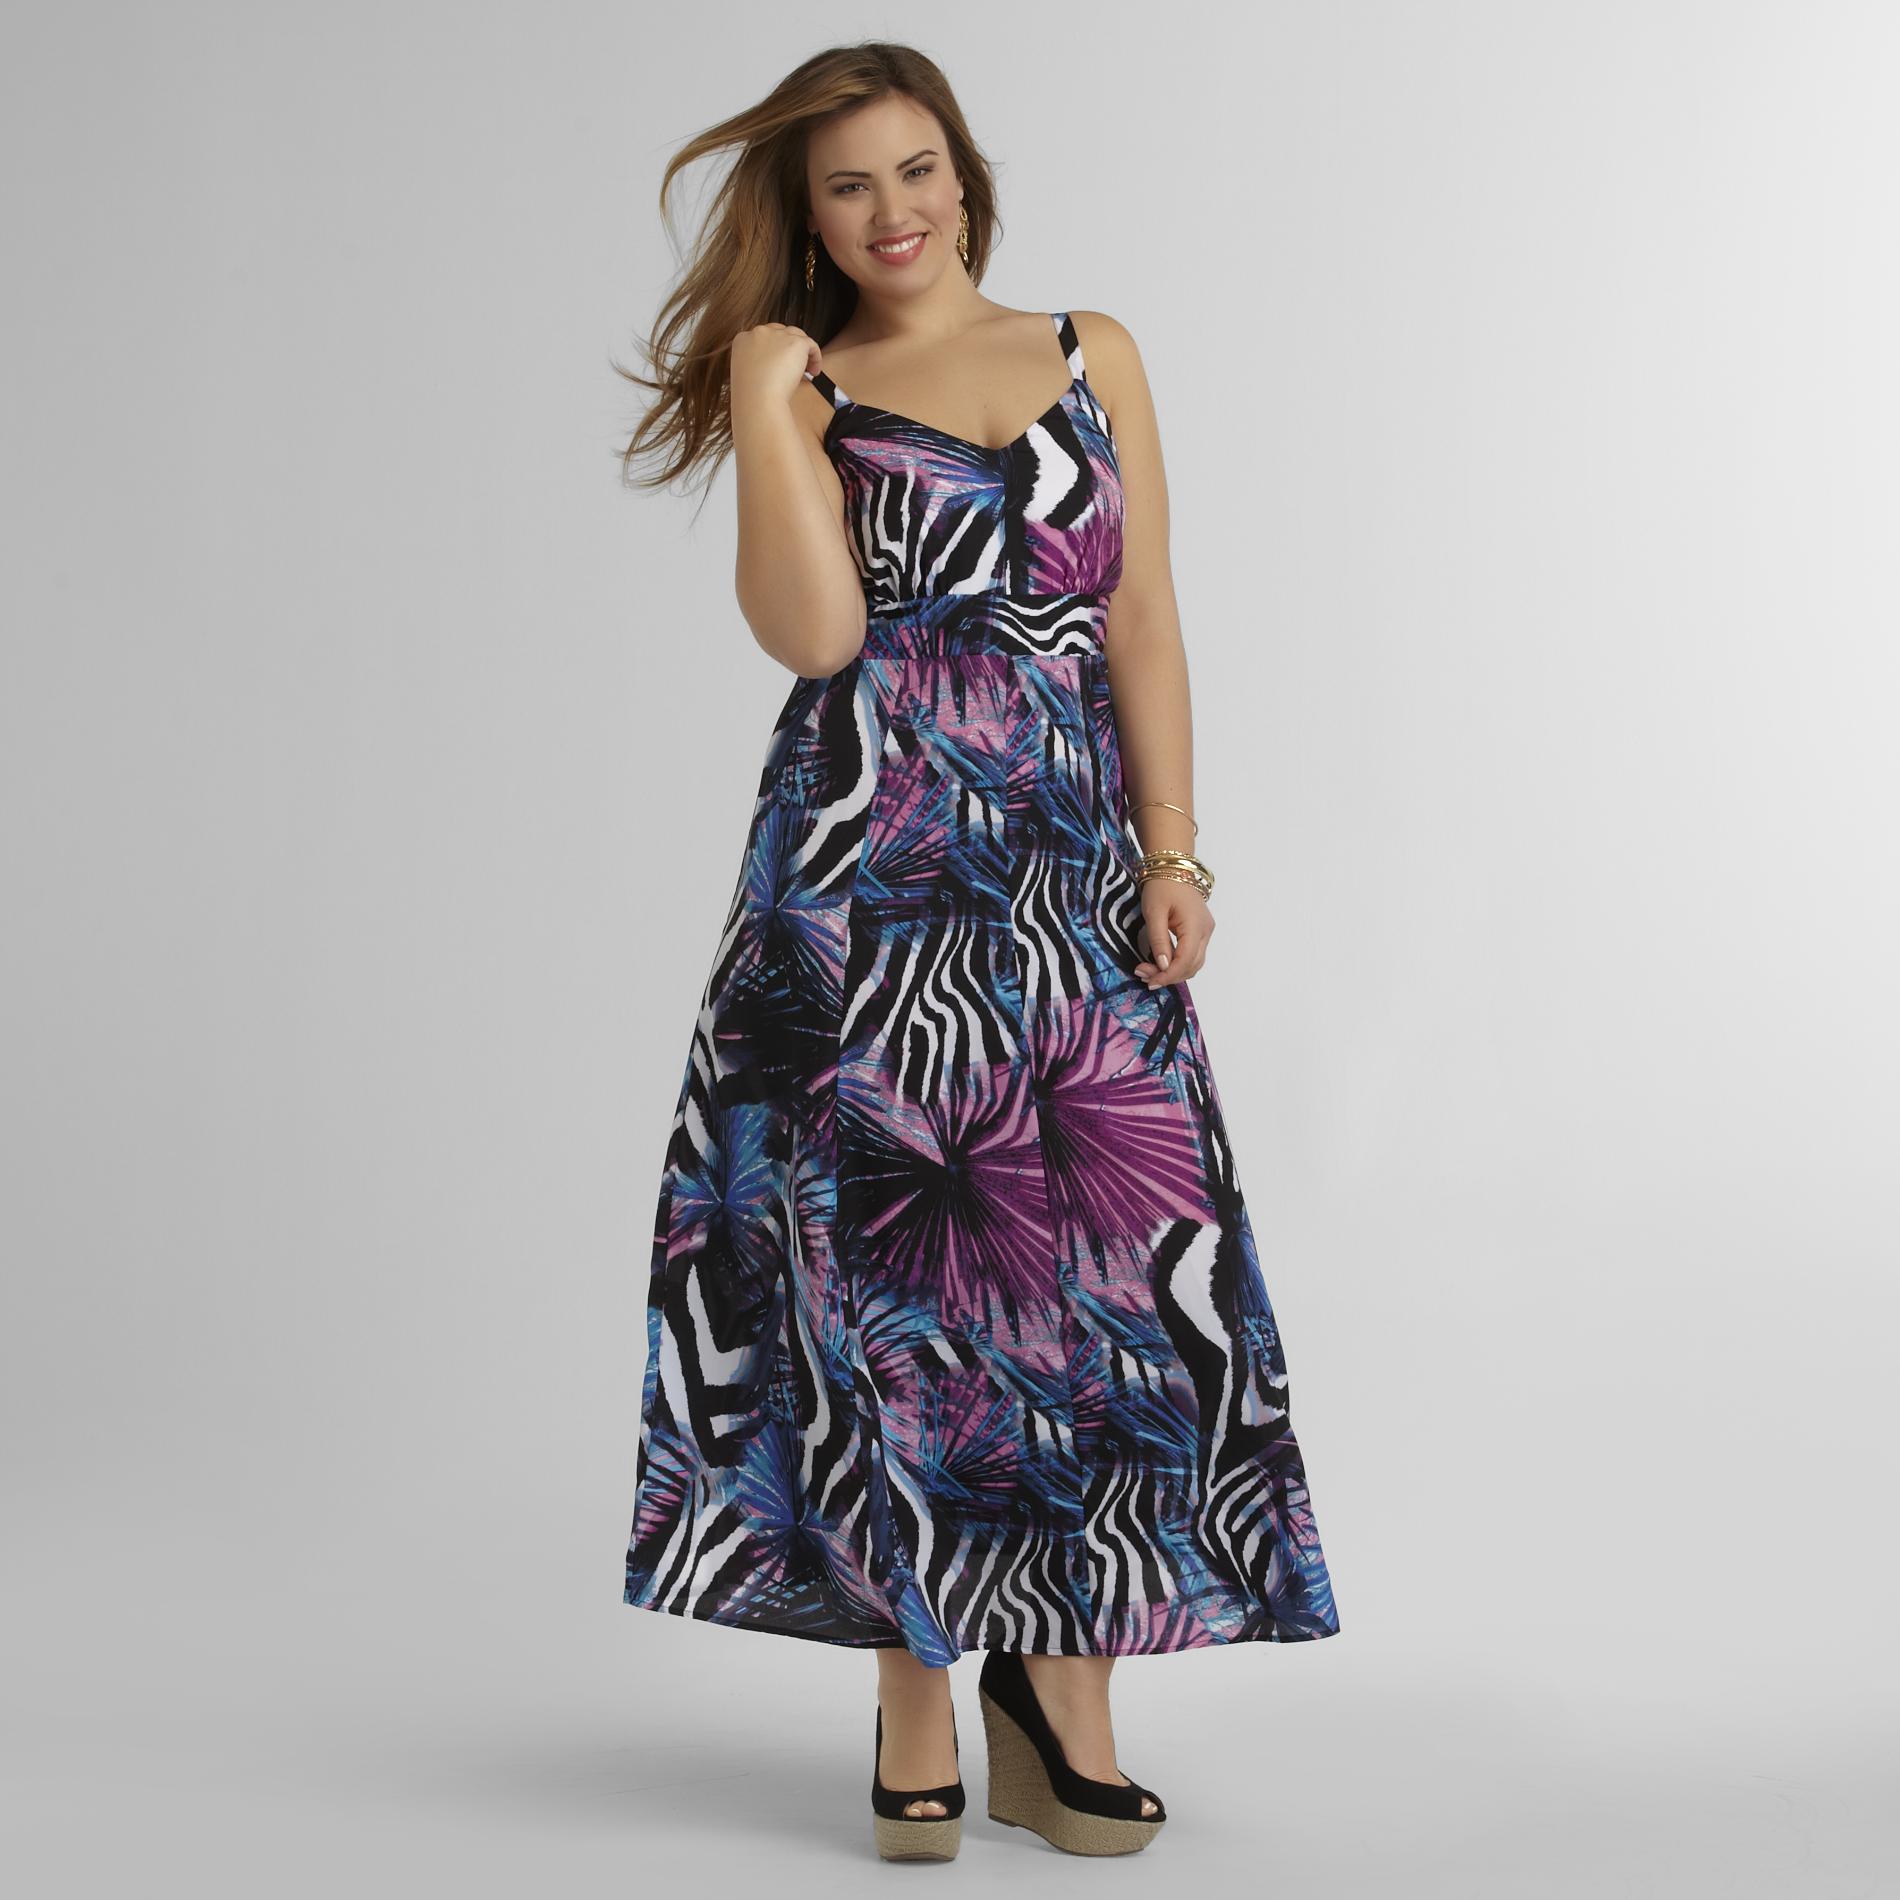 Love Your Style, Love Your Size Women's Plus Maxi Dress - Floral & Animal Print